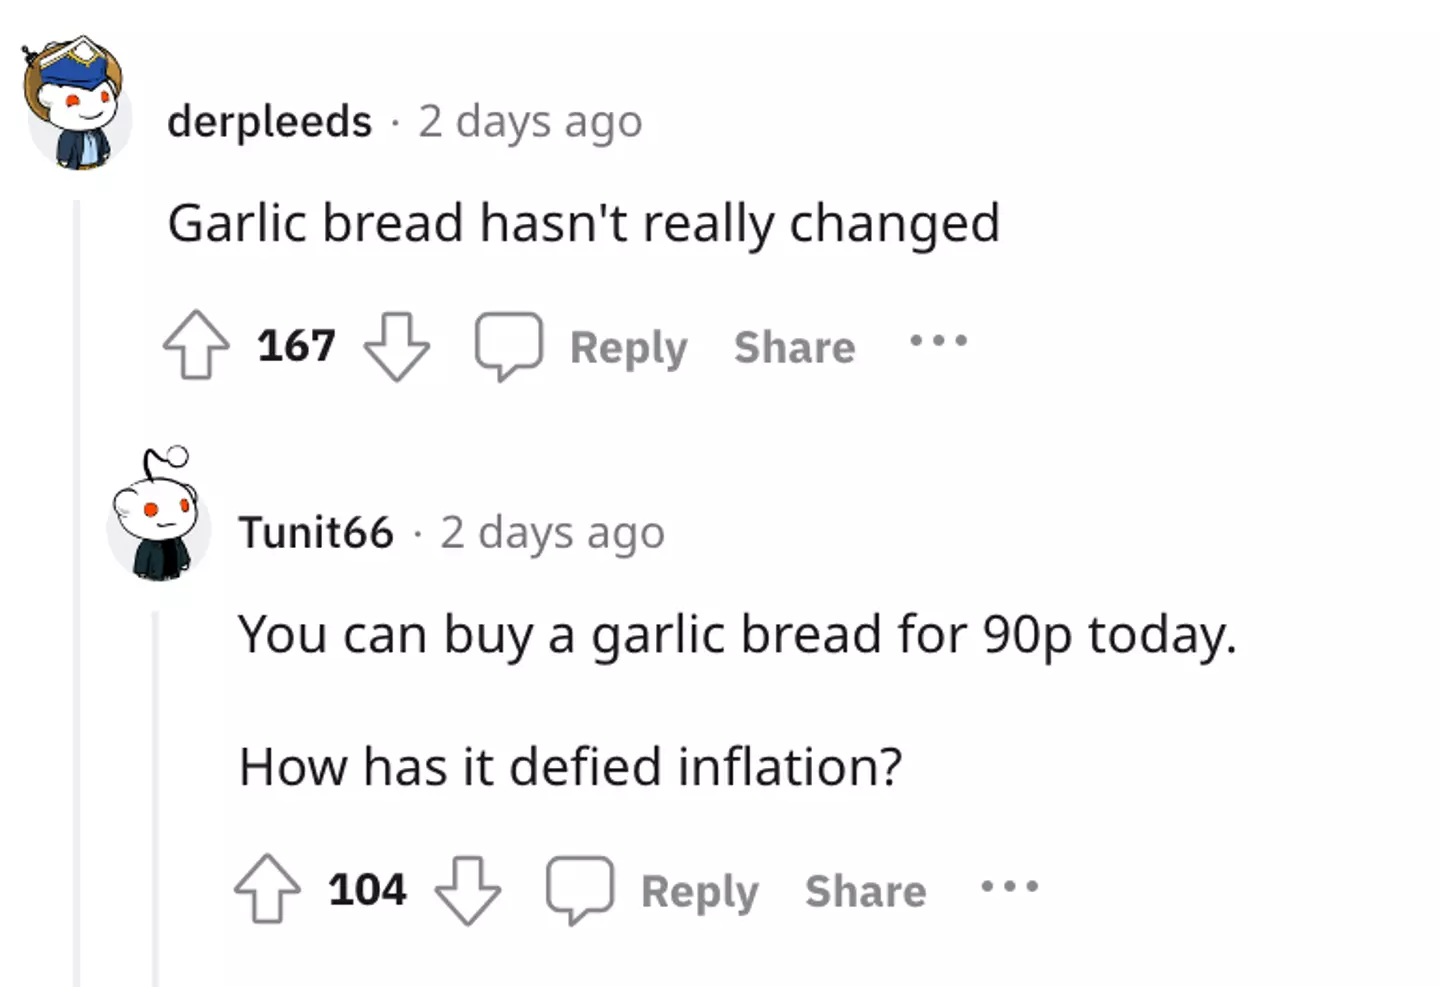 Garlic bread seemed to be 'immune' from 26 years of inflation.